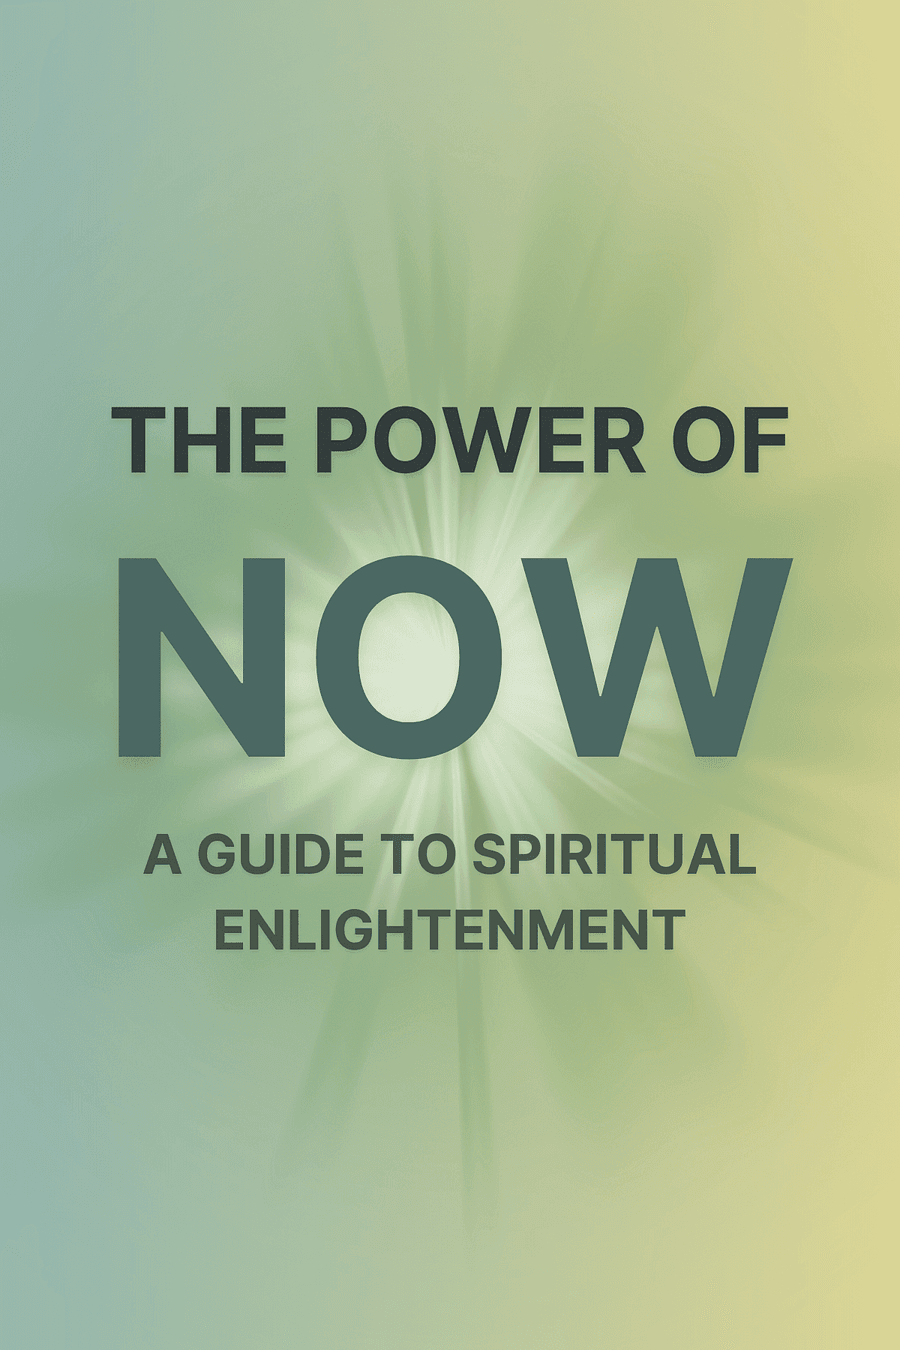 The Power of Now by Eckhart Tolle - Book Summary